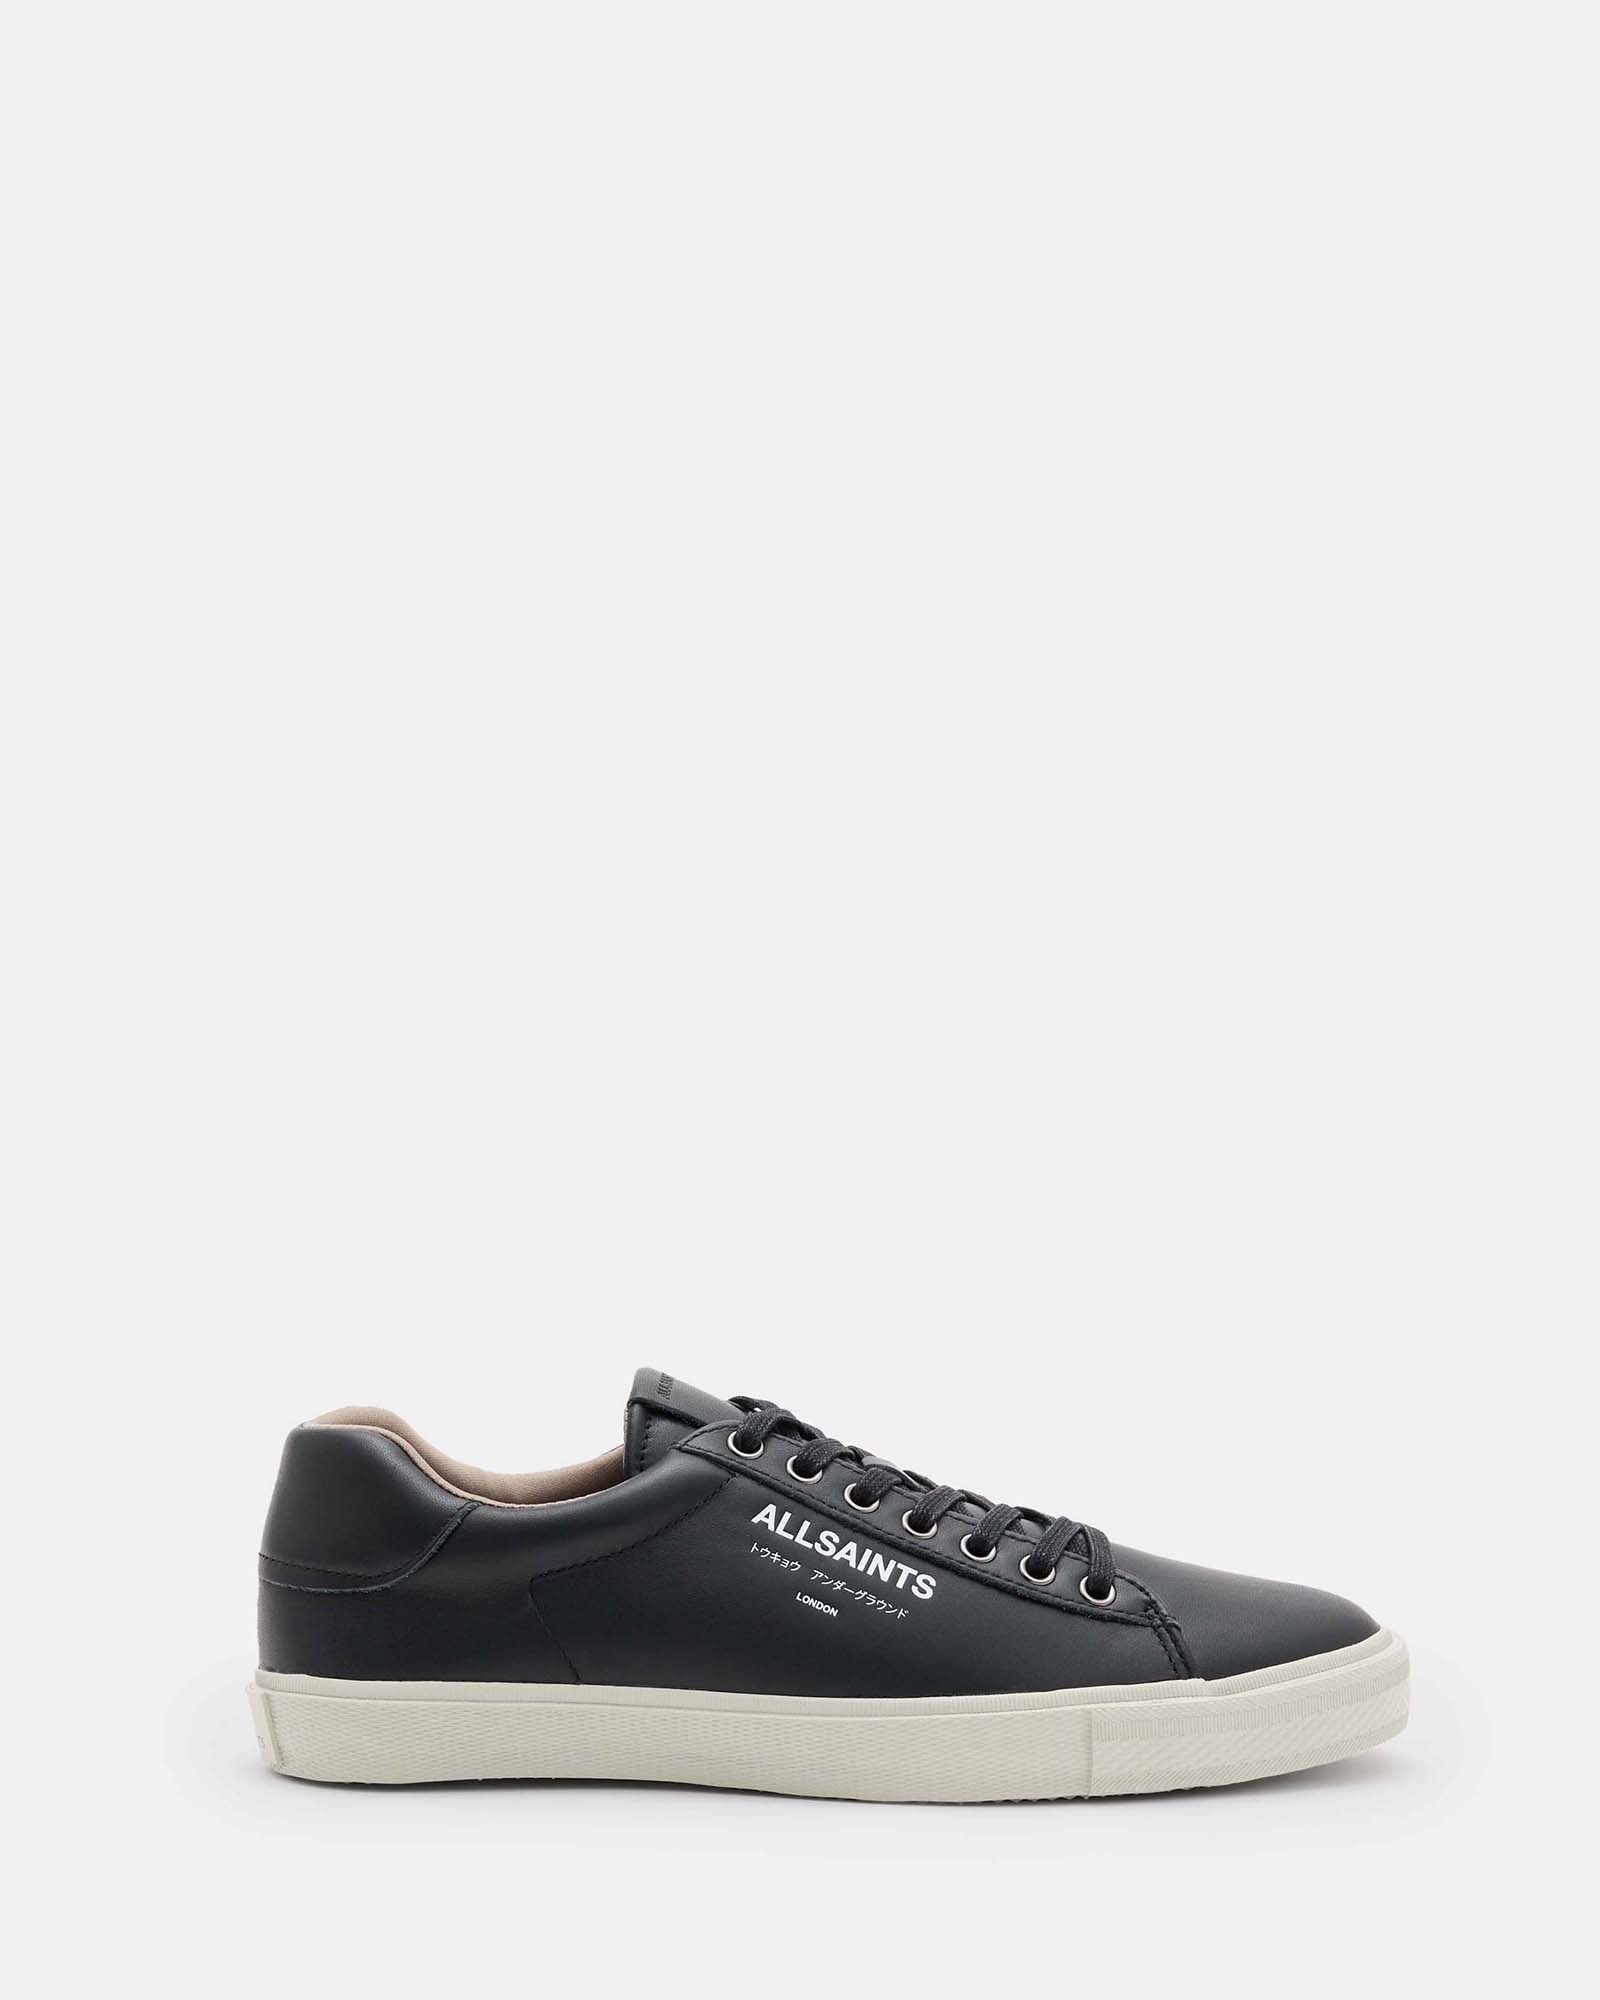 AllSaints Underground Leather Low Top Sneakers